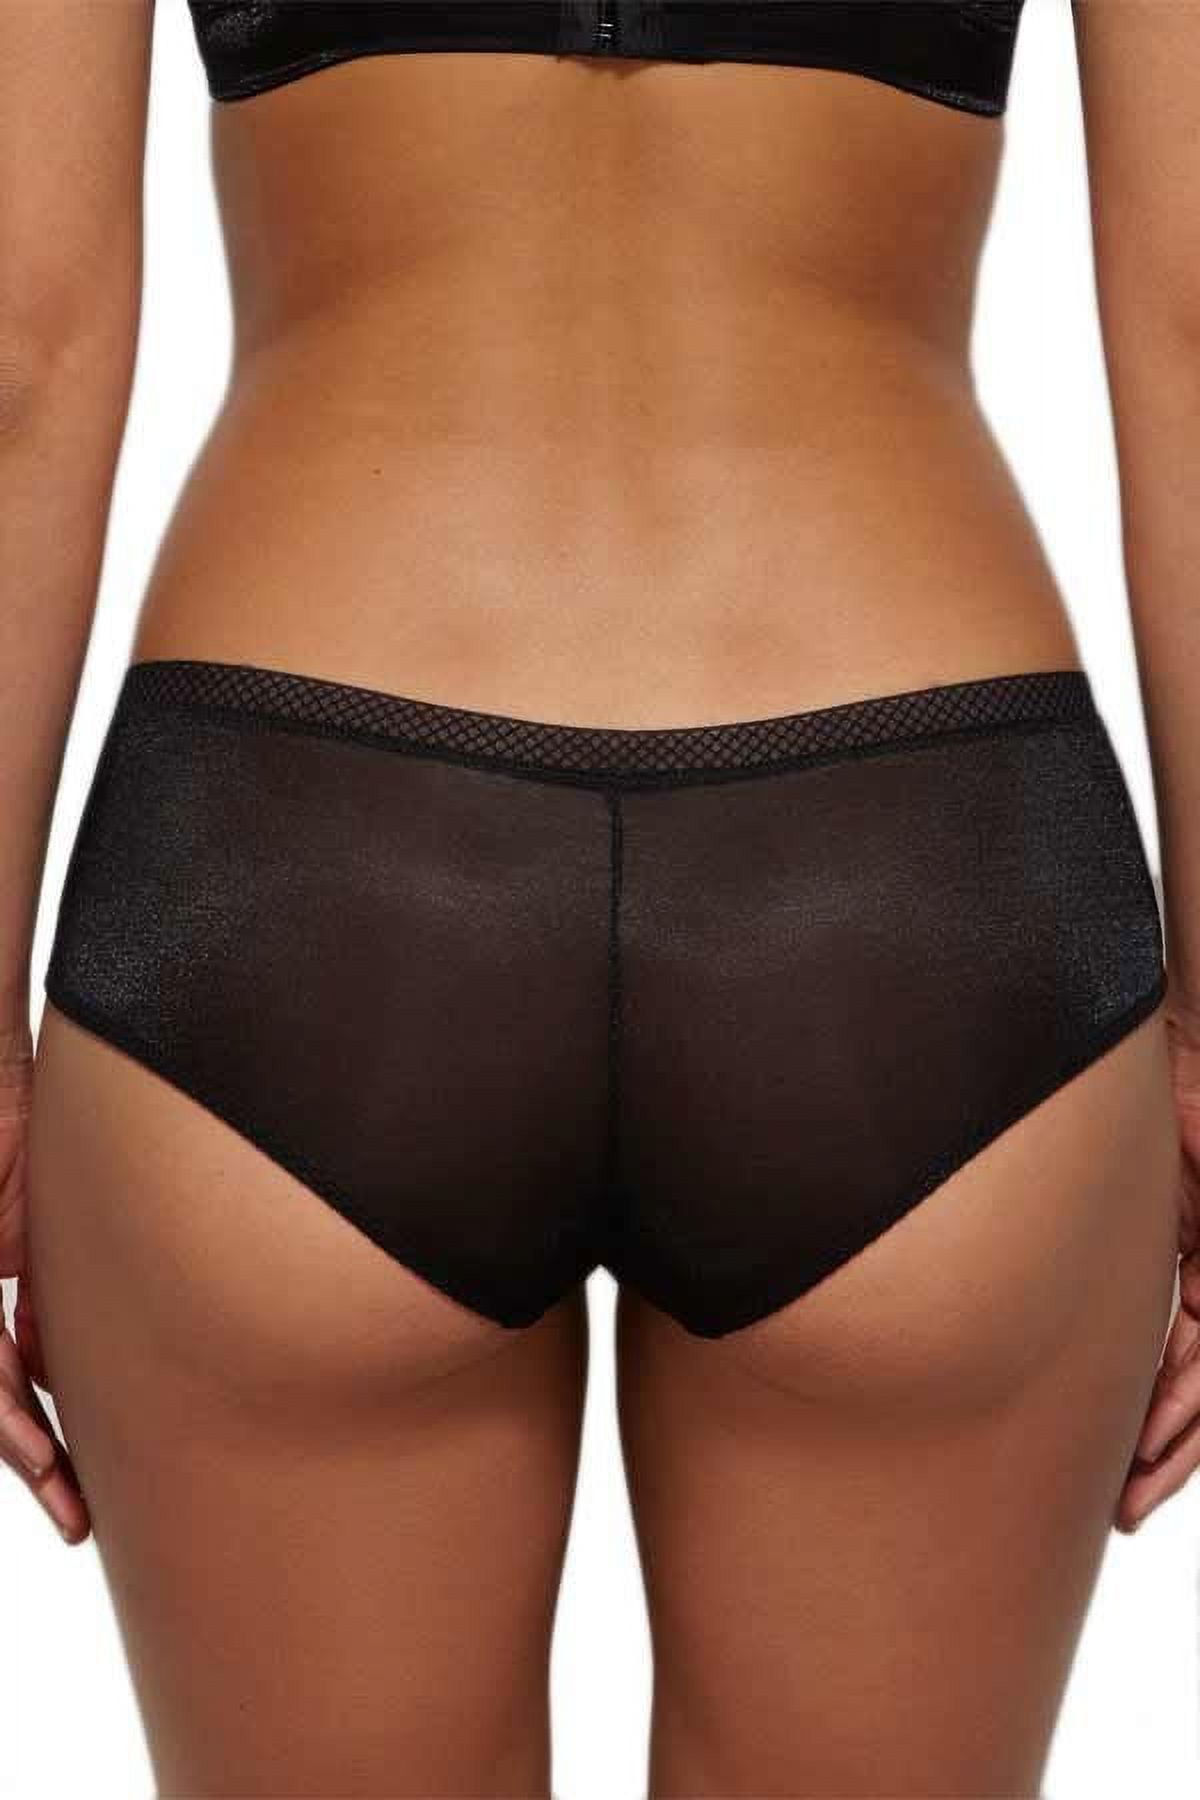 Sheer See Through Shorts Panty New Gossard Lingerie Glossies